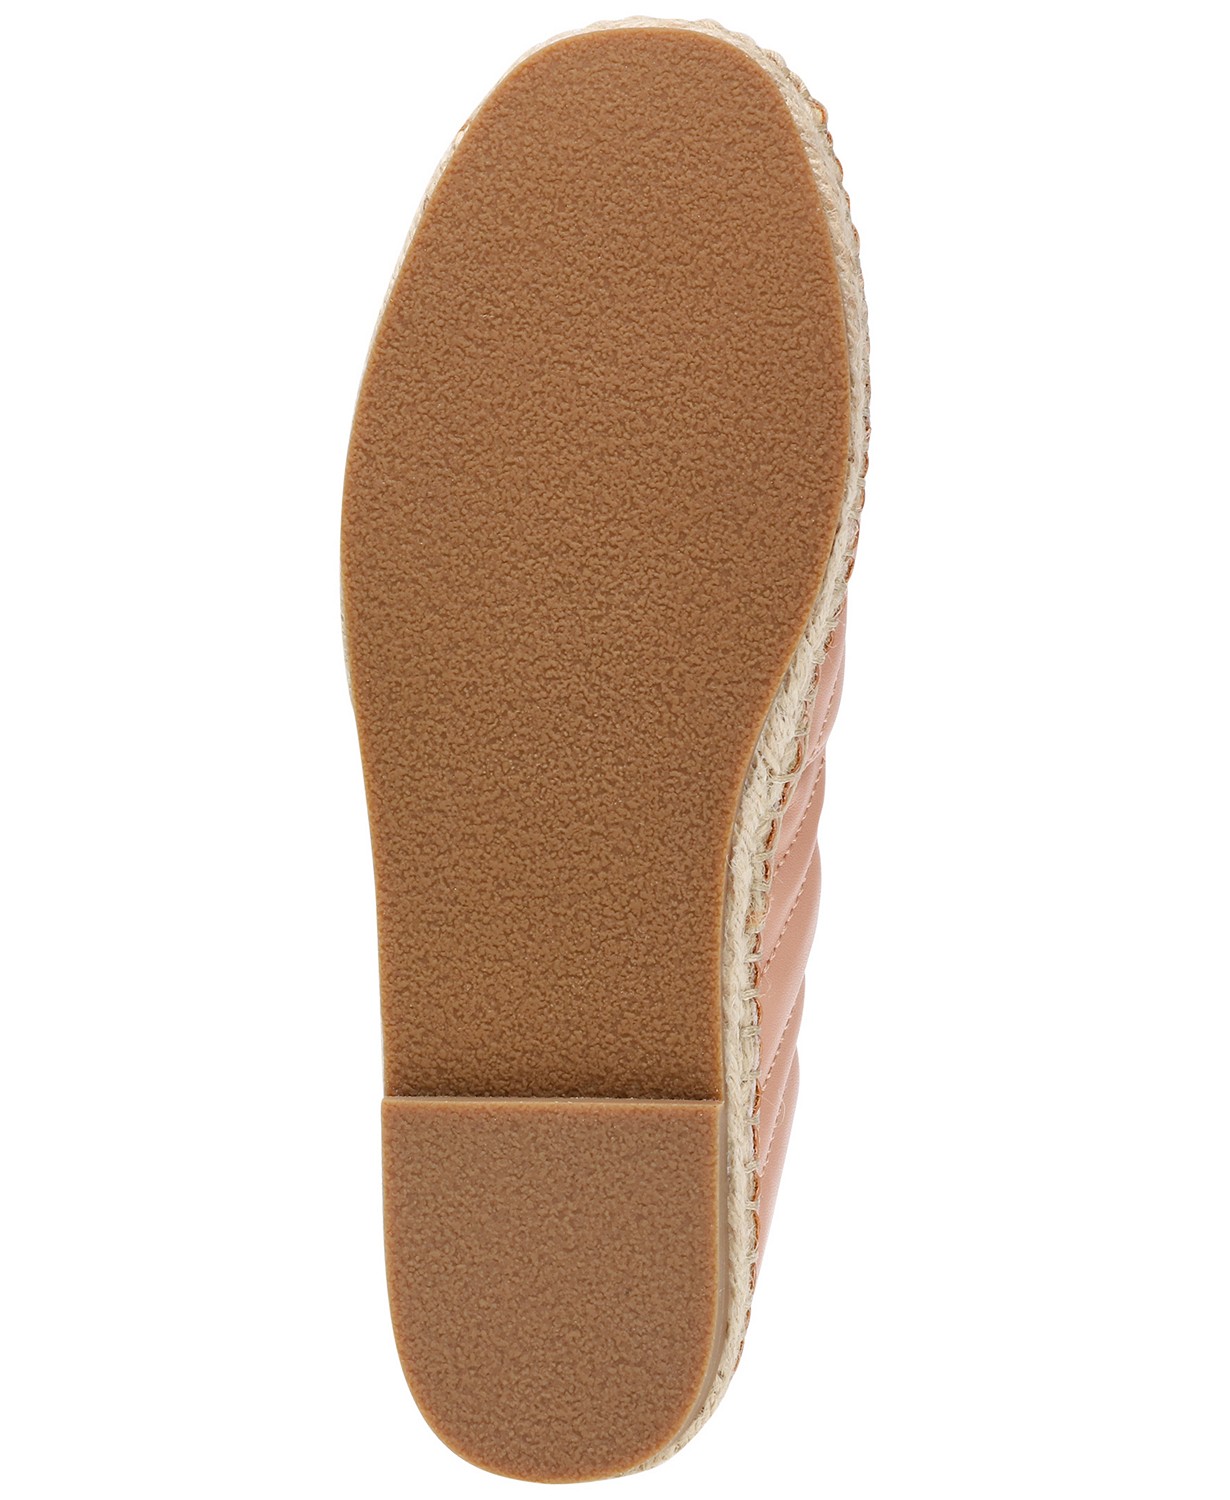 www.couturepoint.com-journee-collection-womens-brown-ekko-flat-copy